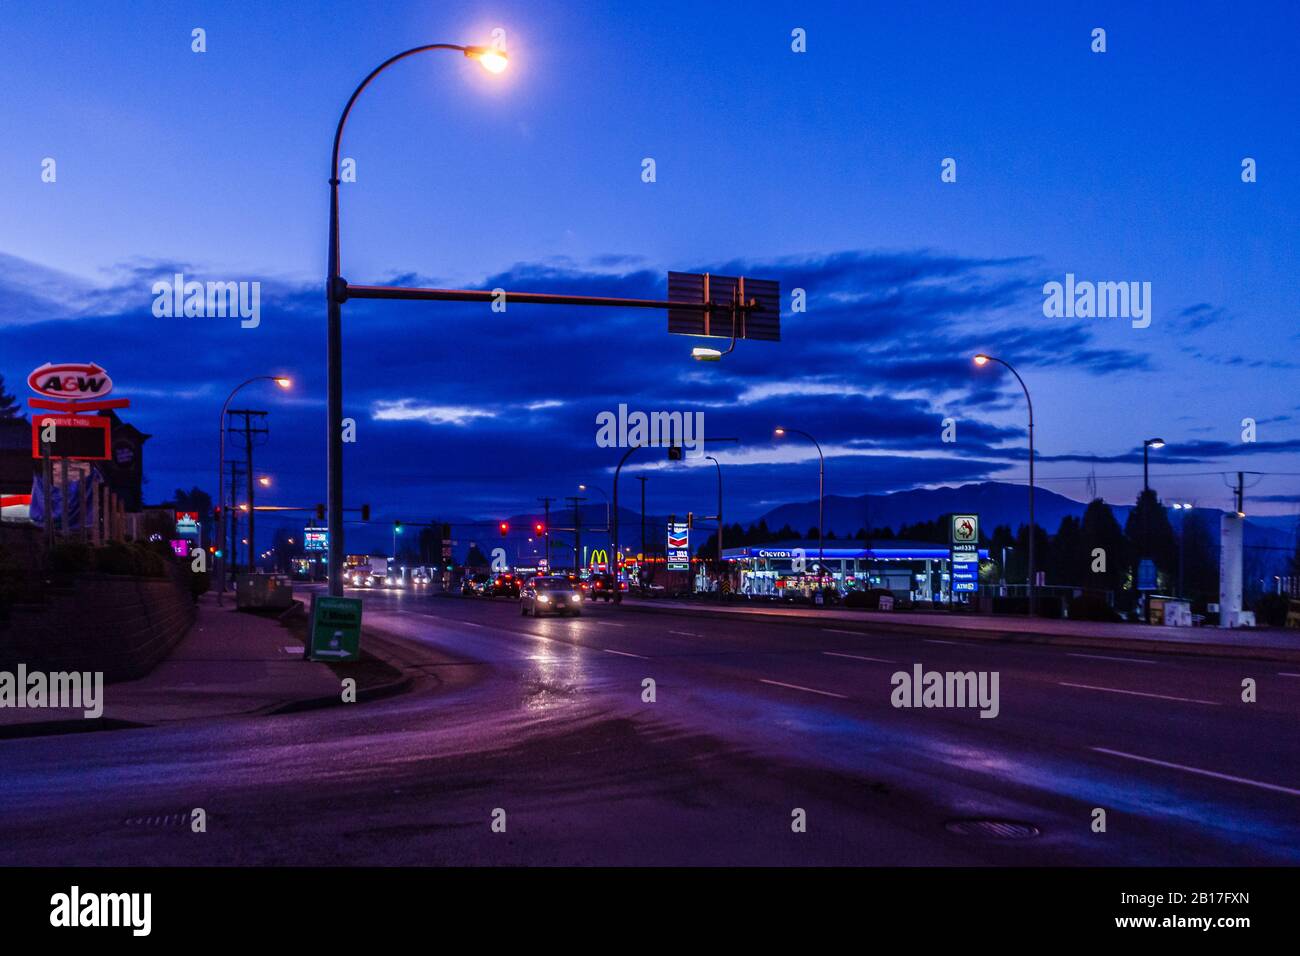 ABBOTSFORD, CANADA - FEBRUARY 10, 2020: retail store strip mall in early morning. Stock Photo